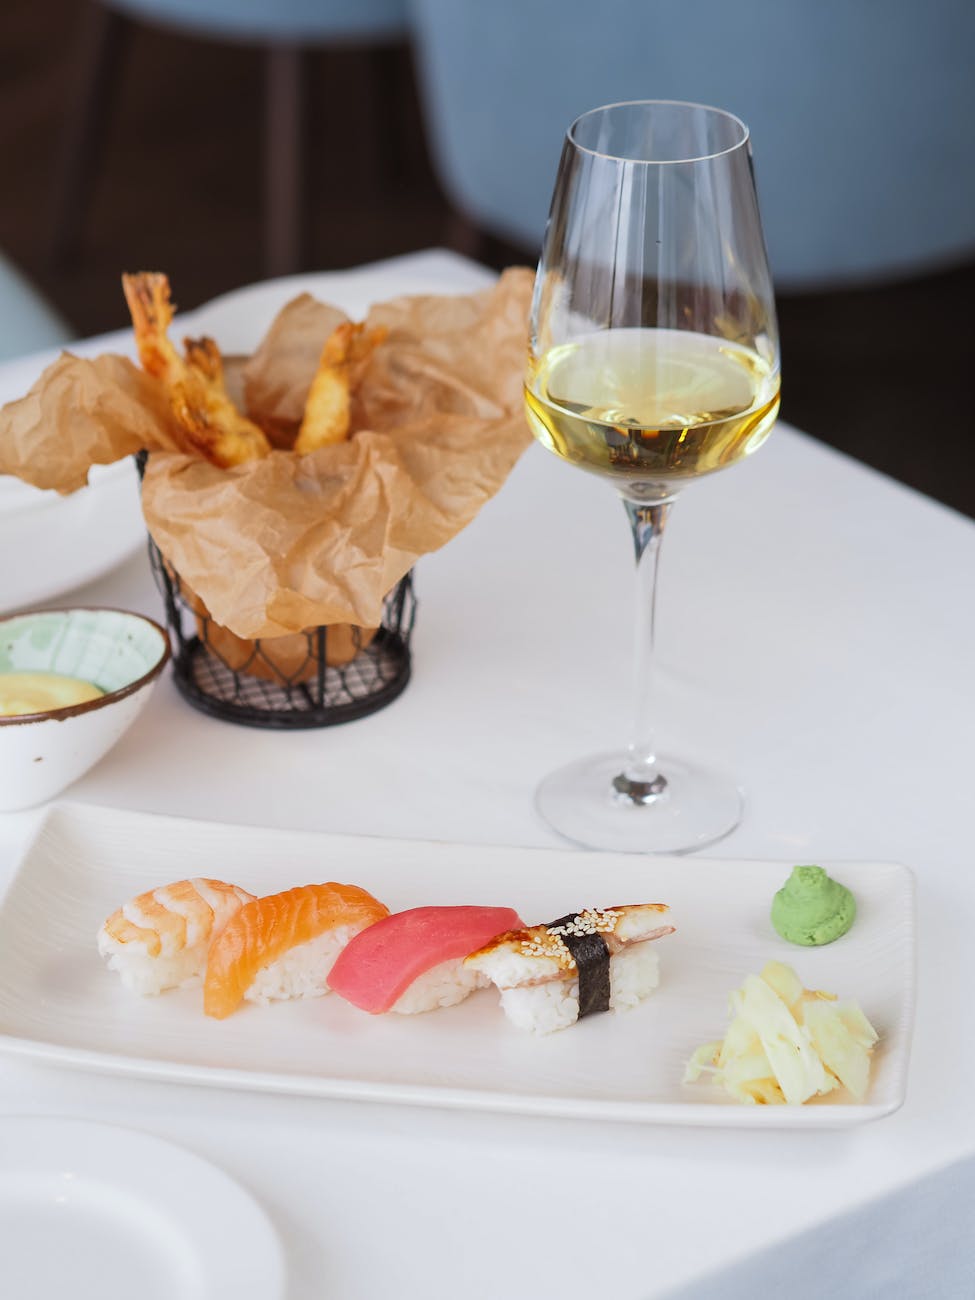 sushi fried chips with dip and glass of white wine at restaurant